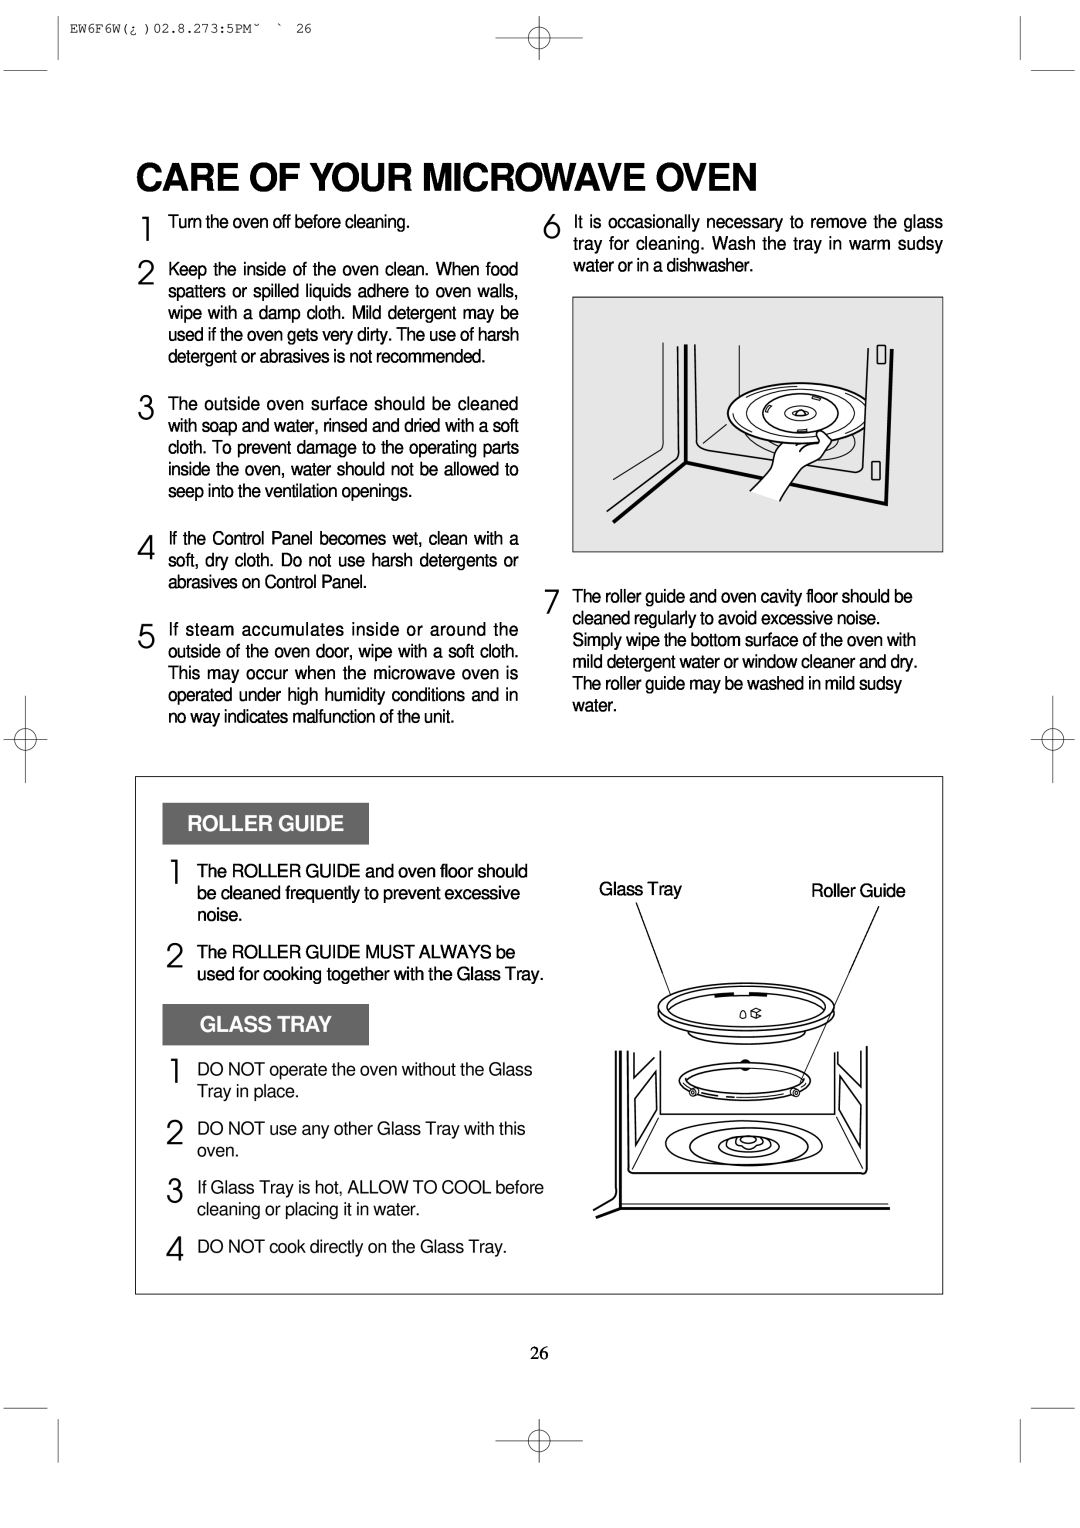 Daewoo EW6F6W instruction manual Care Of Your Microwave Oven, Roller Guide, Glass Tray 